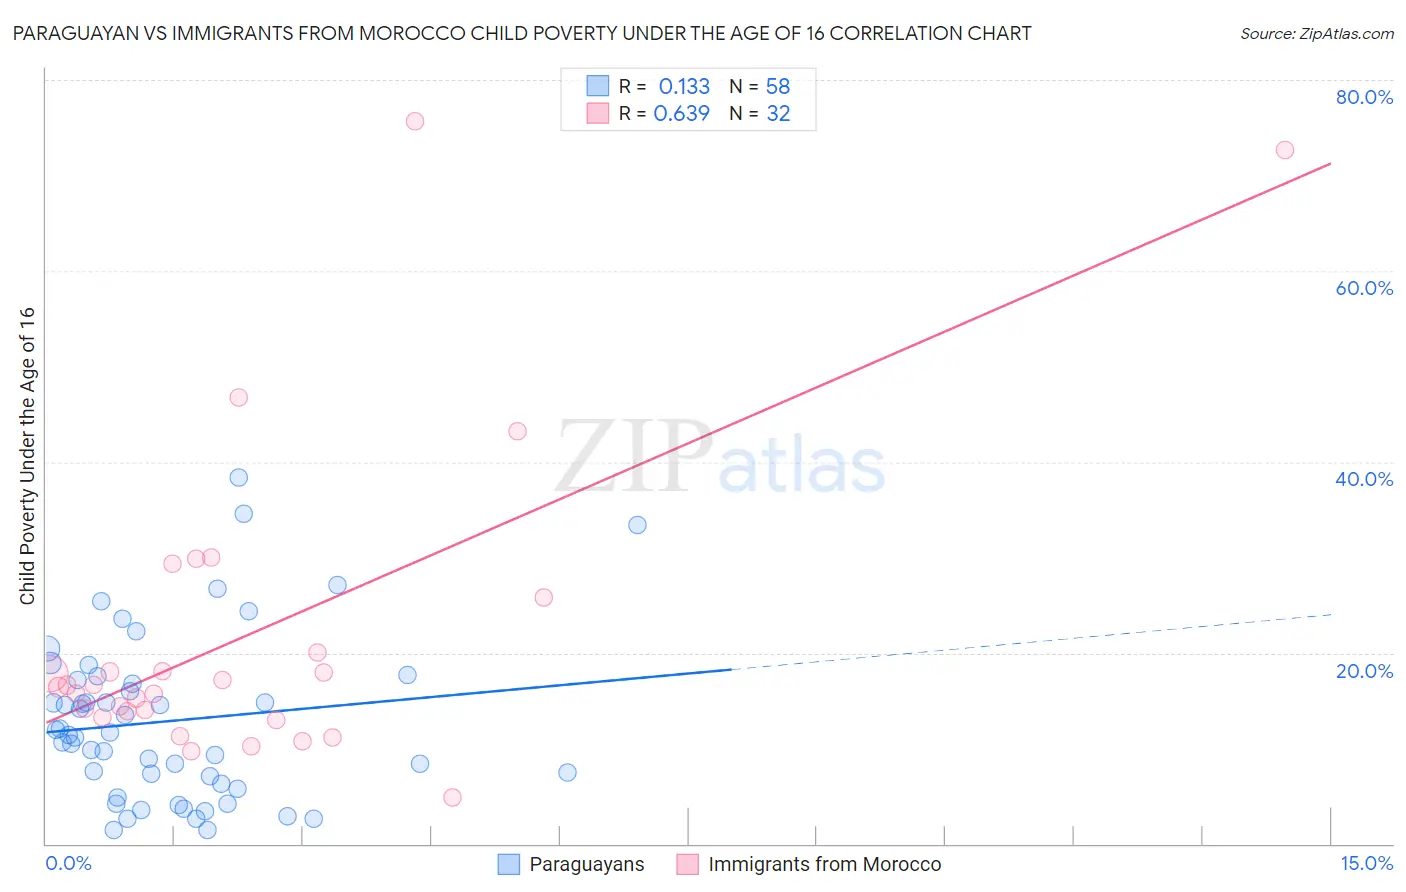 Paraguayan vs Immigrants from Morocco Child Poverty Under the Age of 16